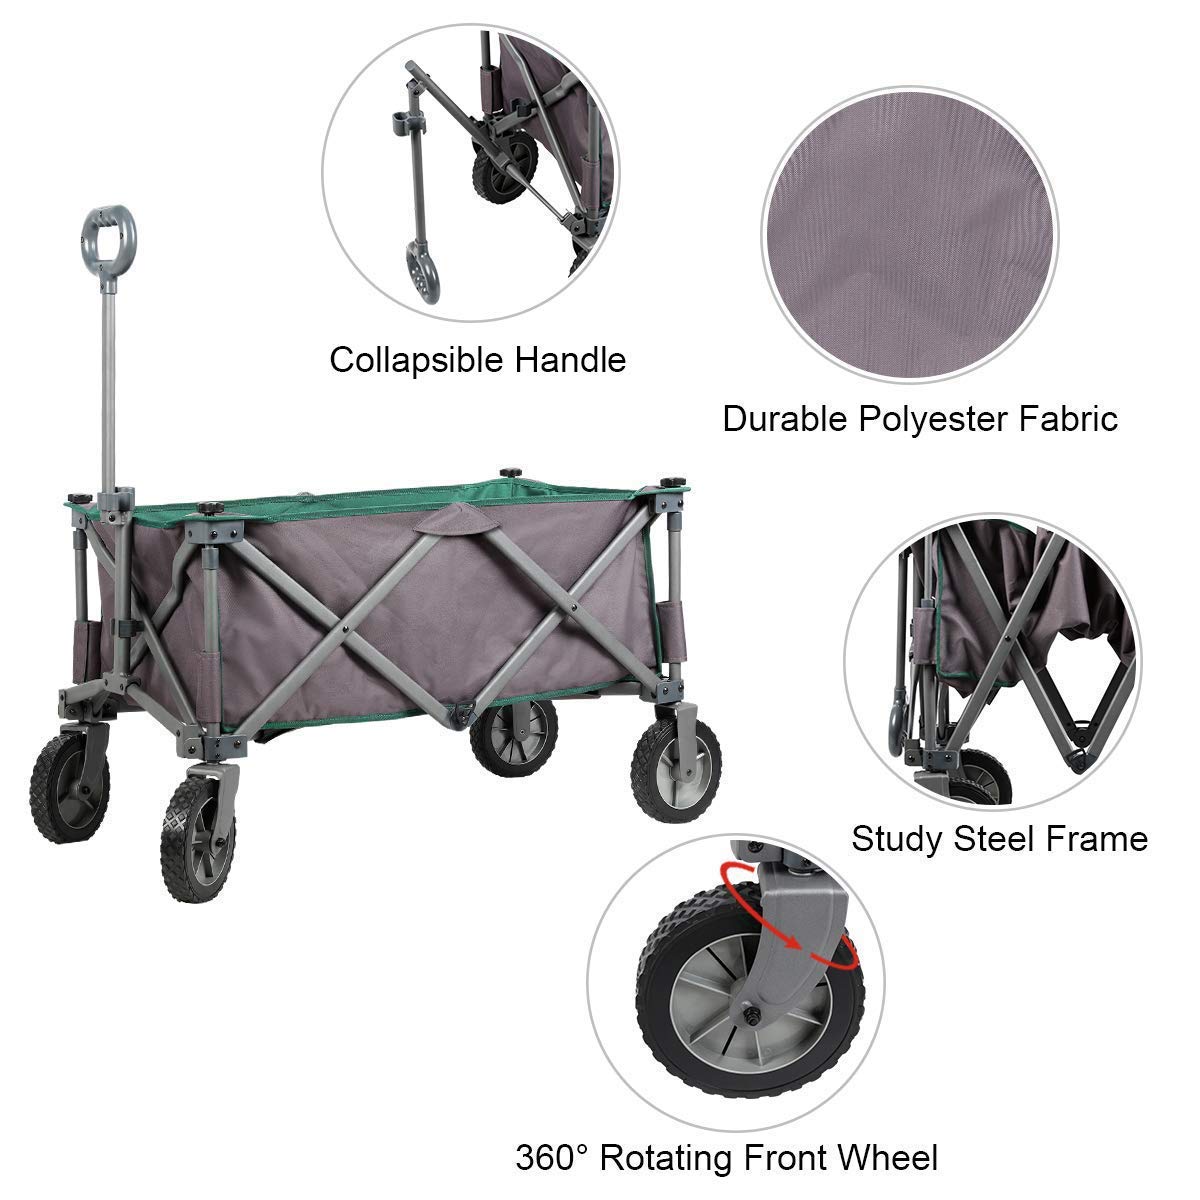 PORTAL Collapsible Folding Utility Wagon Quad Compact Outdoor Garden Camping Cart with Removable Fabric, Support up to 225 lbs (Grey/Green)